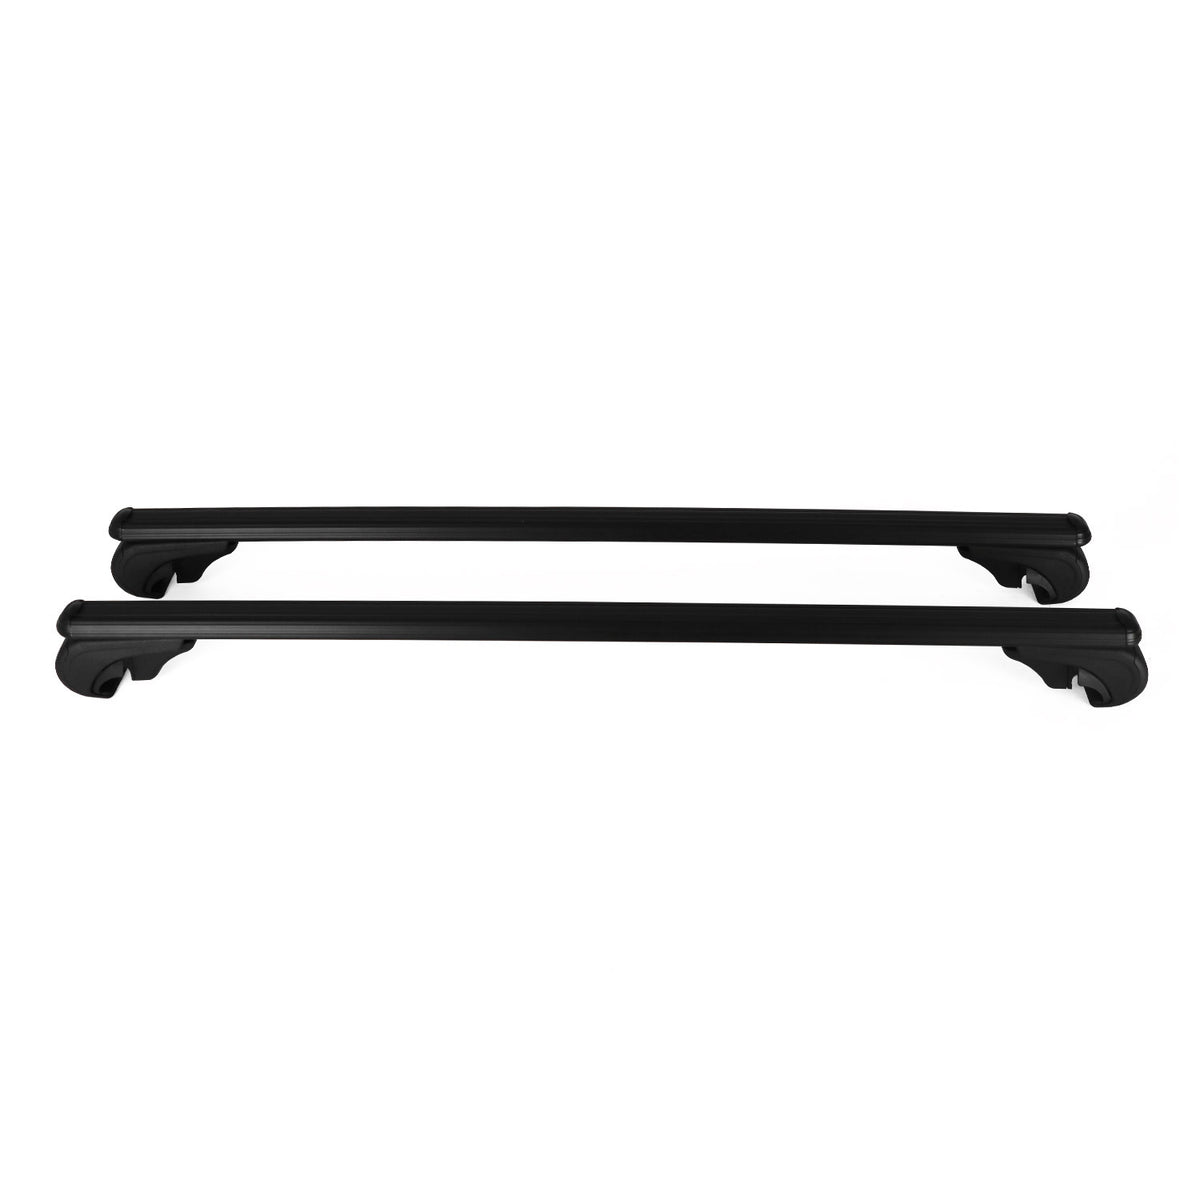 Roof rack luggage rack for Citroen C4 Picasso 2006-2013 aluminum black with ABE